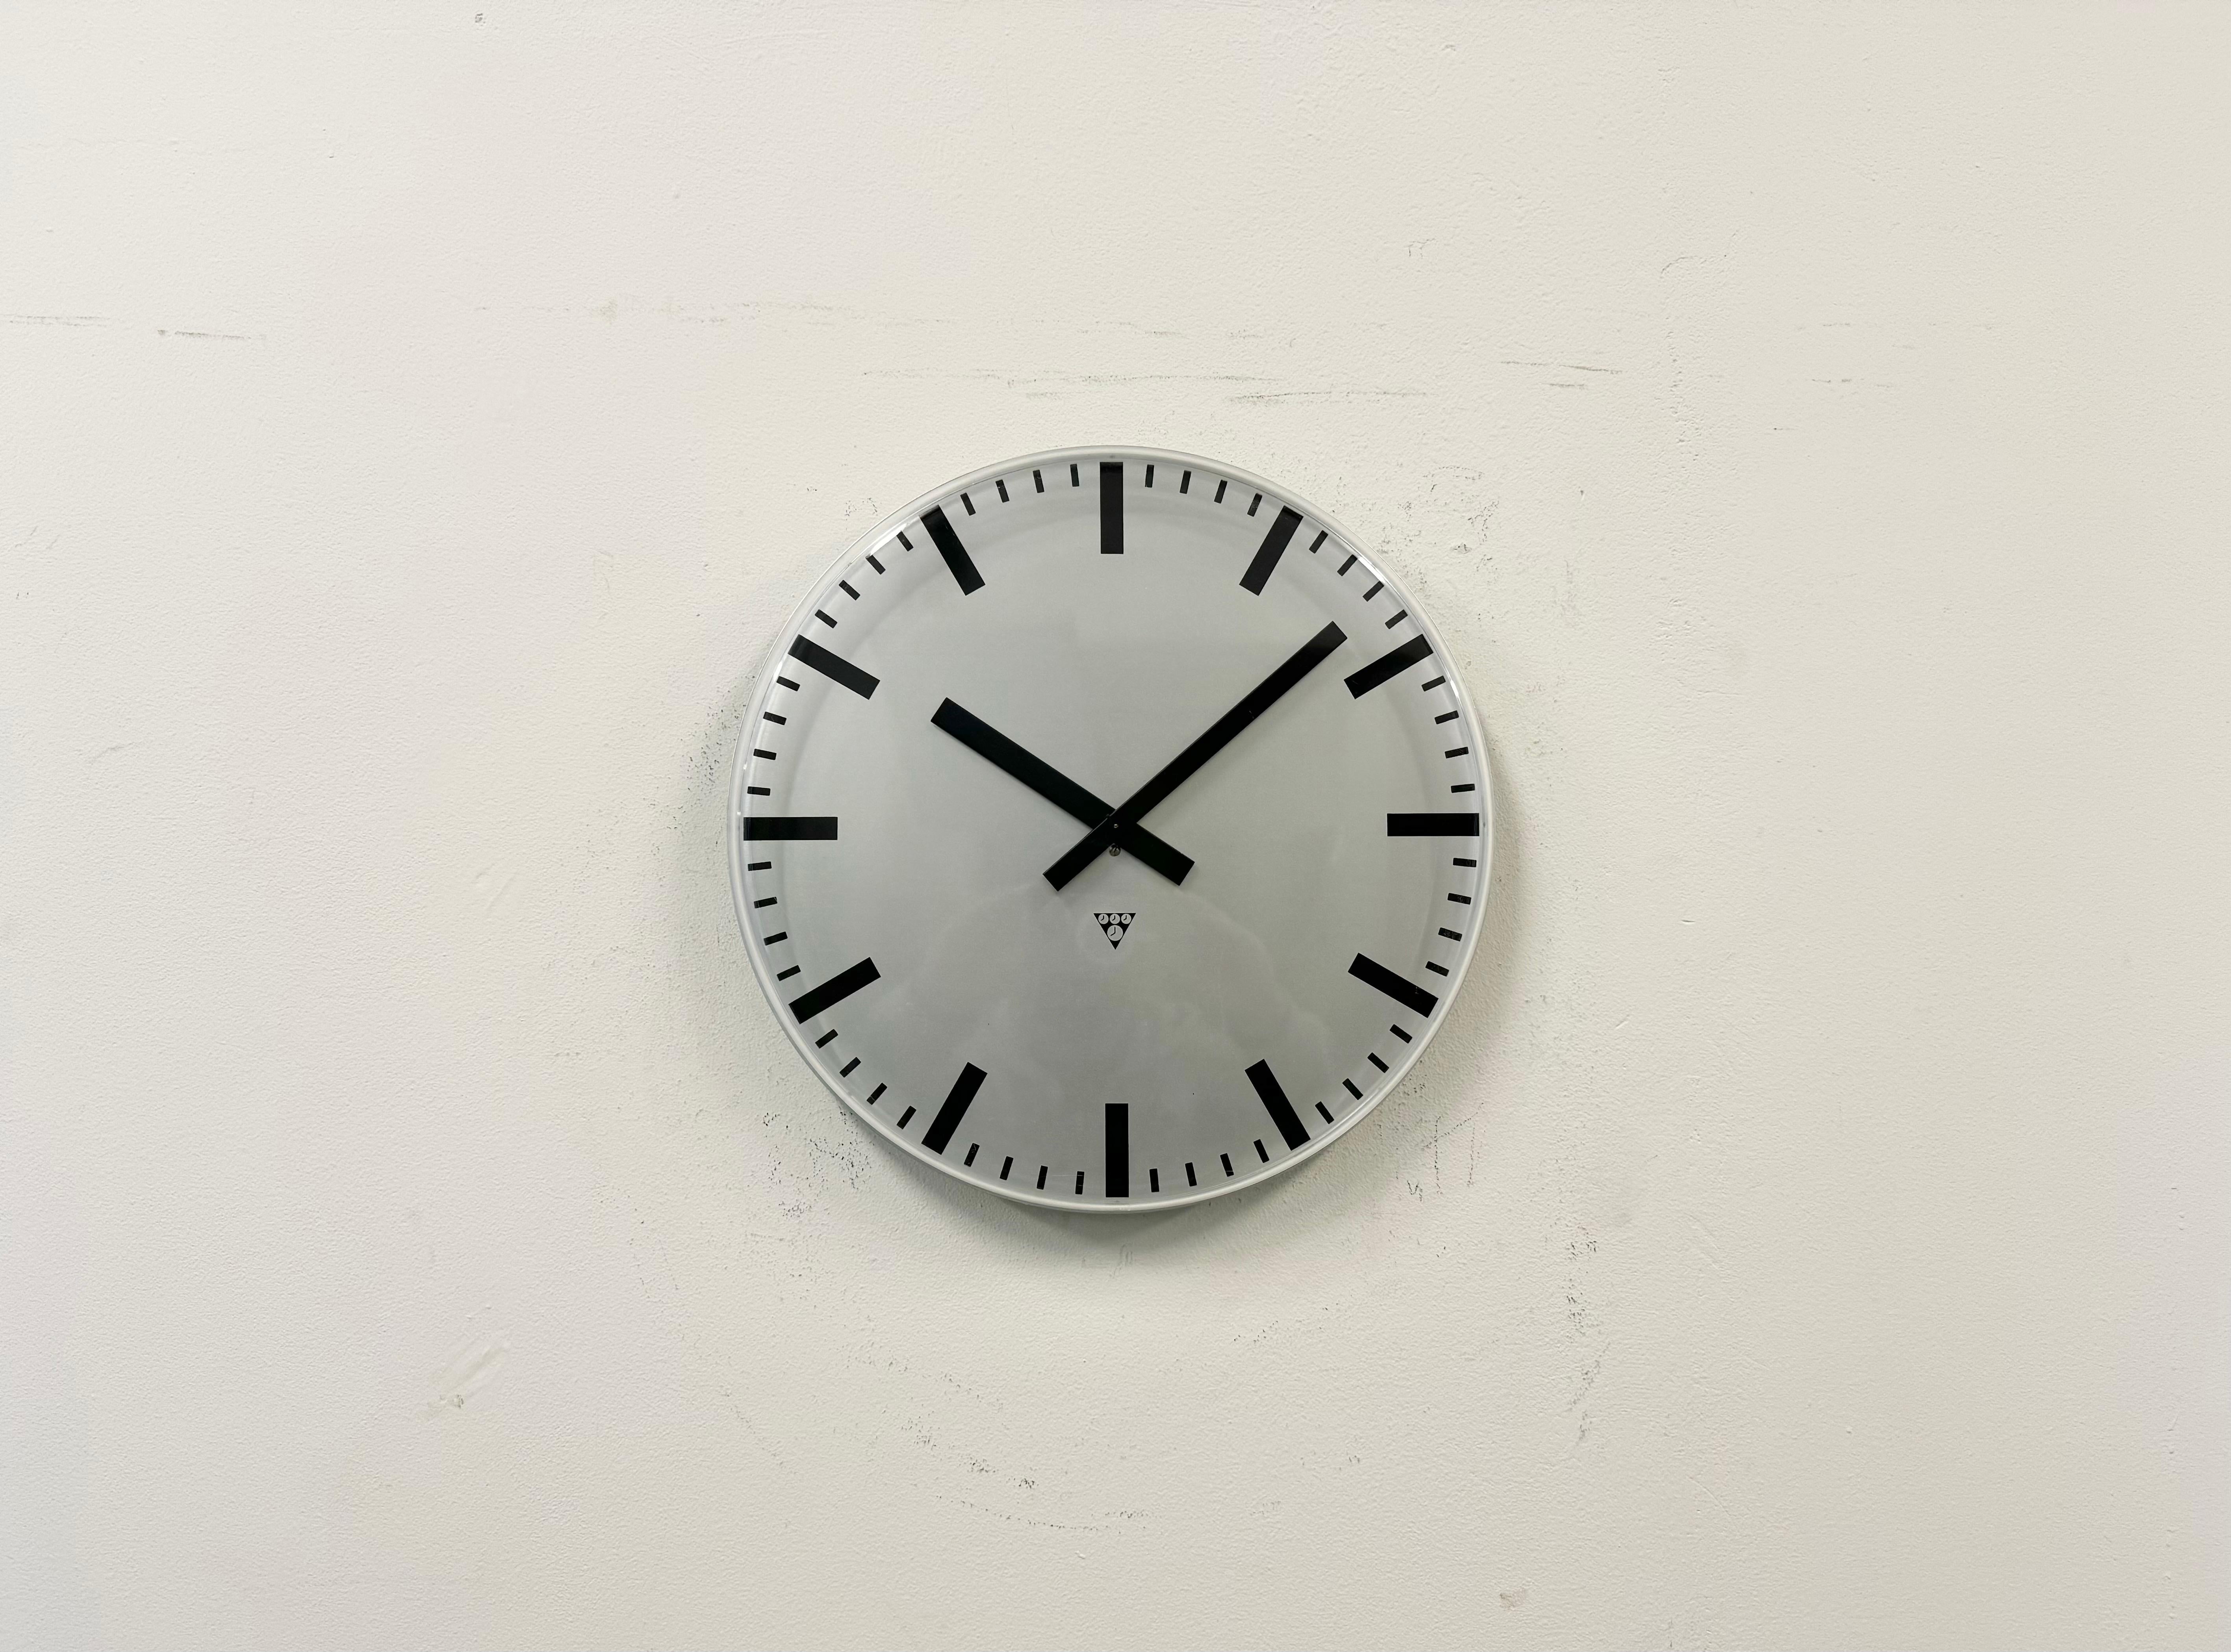 Industrial wall clock was produced by Pragotron in former Czechoslovakia during the 1980s. It features a grey ( silver ) aluminium dial and a curved plastic clear glass cover. The piece has been converted into a battery-powered clockwork and